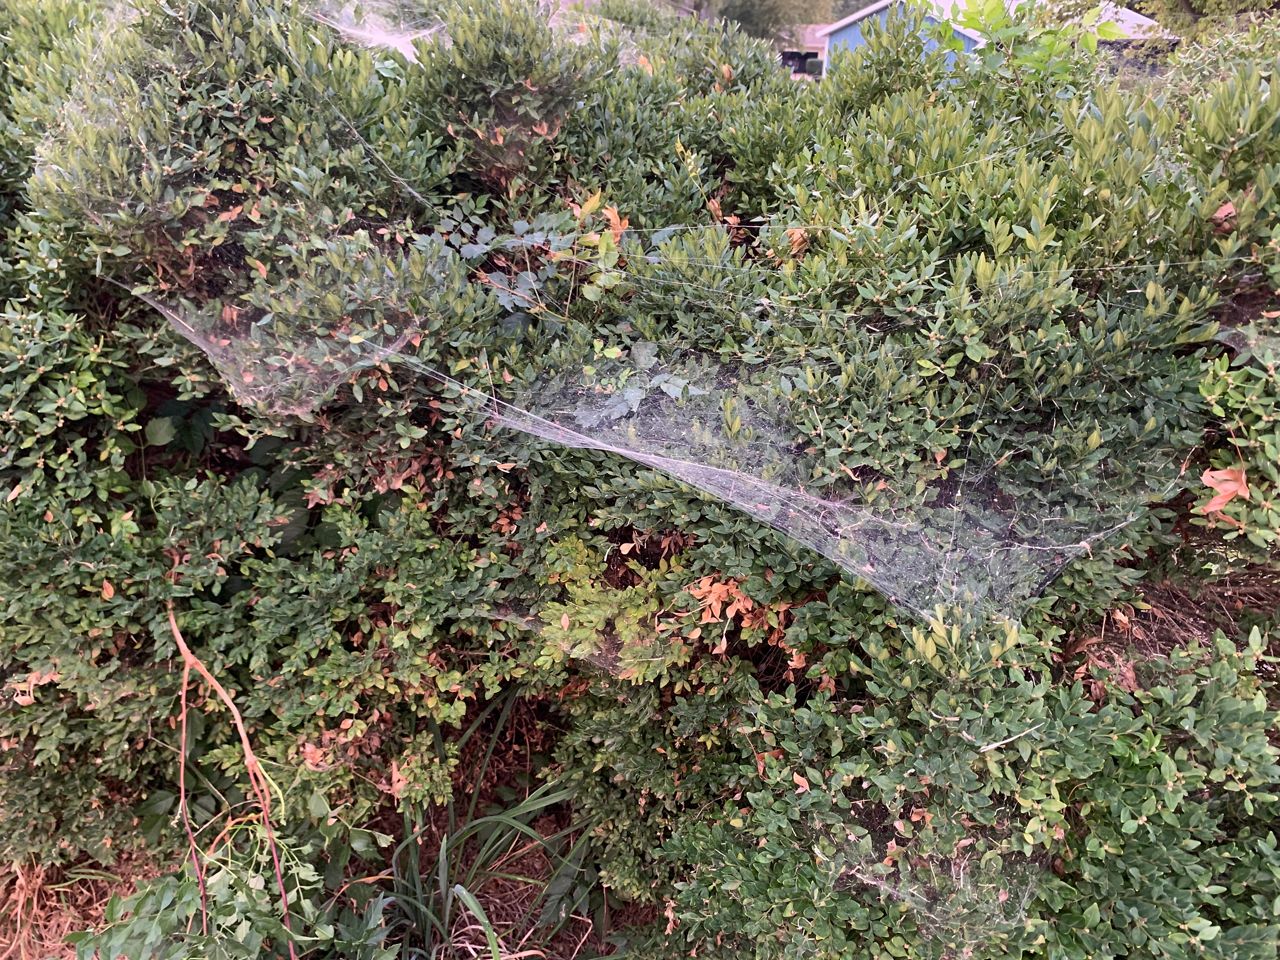 Spider webs on bushes in the fall.